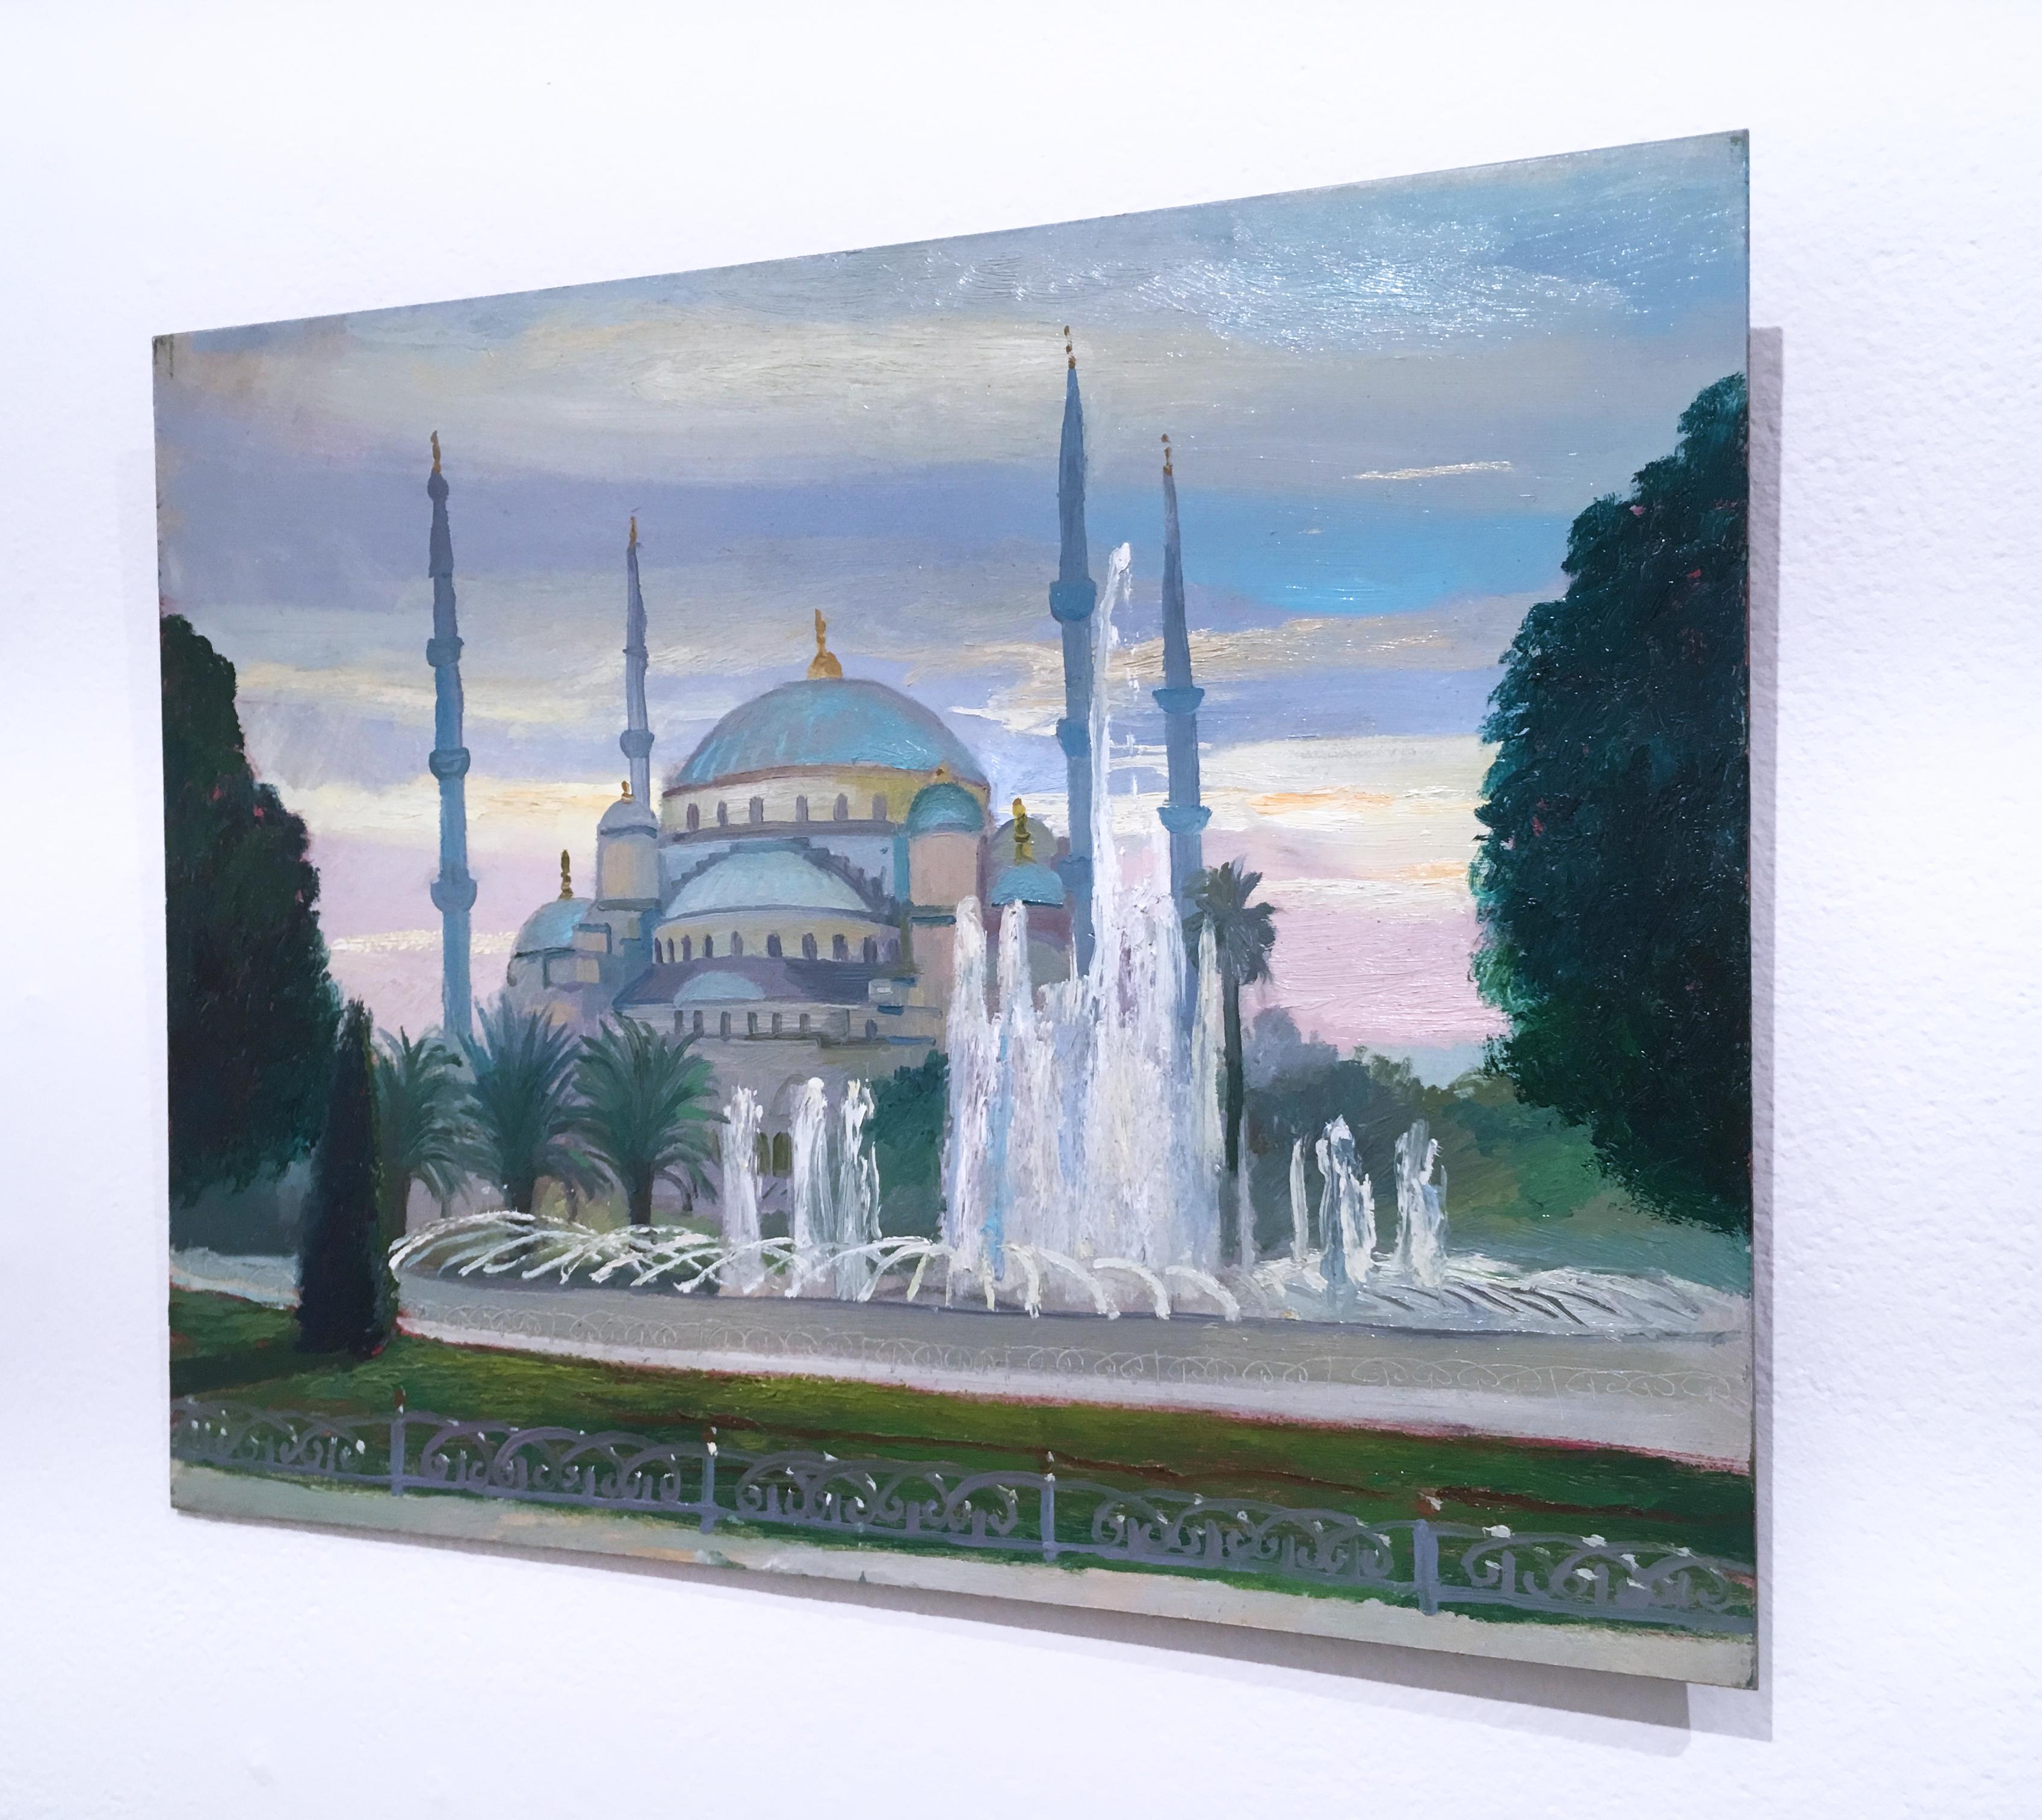 Istanbul Blue Mosque, plein air figurative, landscape, oil on panel, 2014 - Gray Landscape Painting by Thomas John Carlson